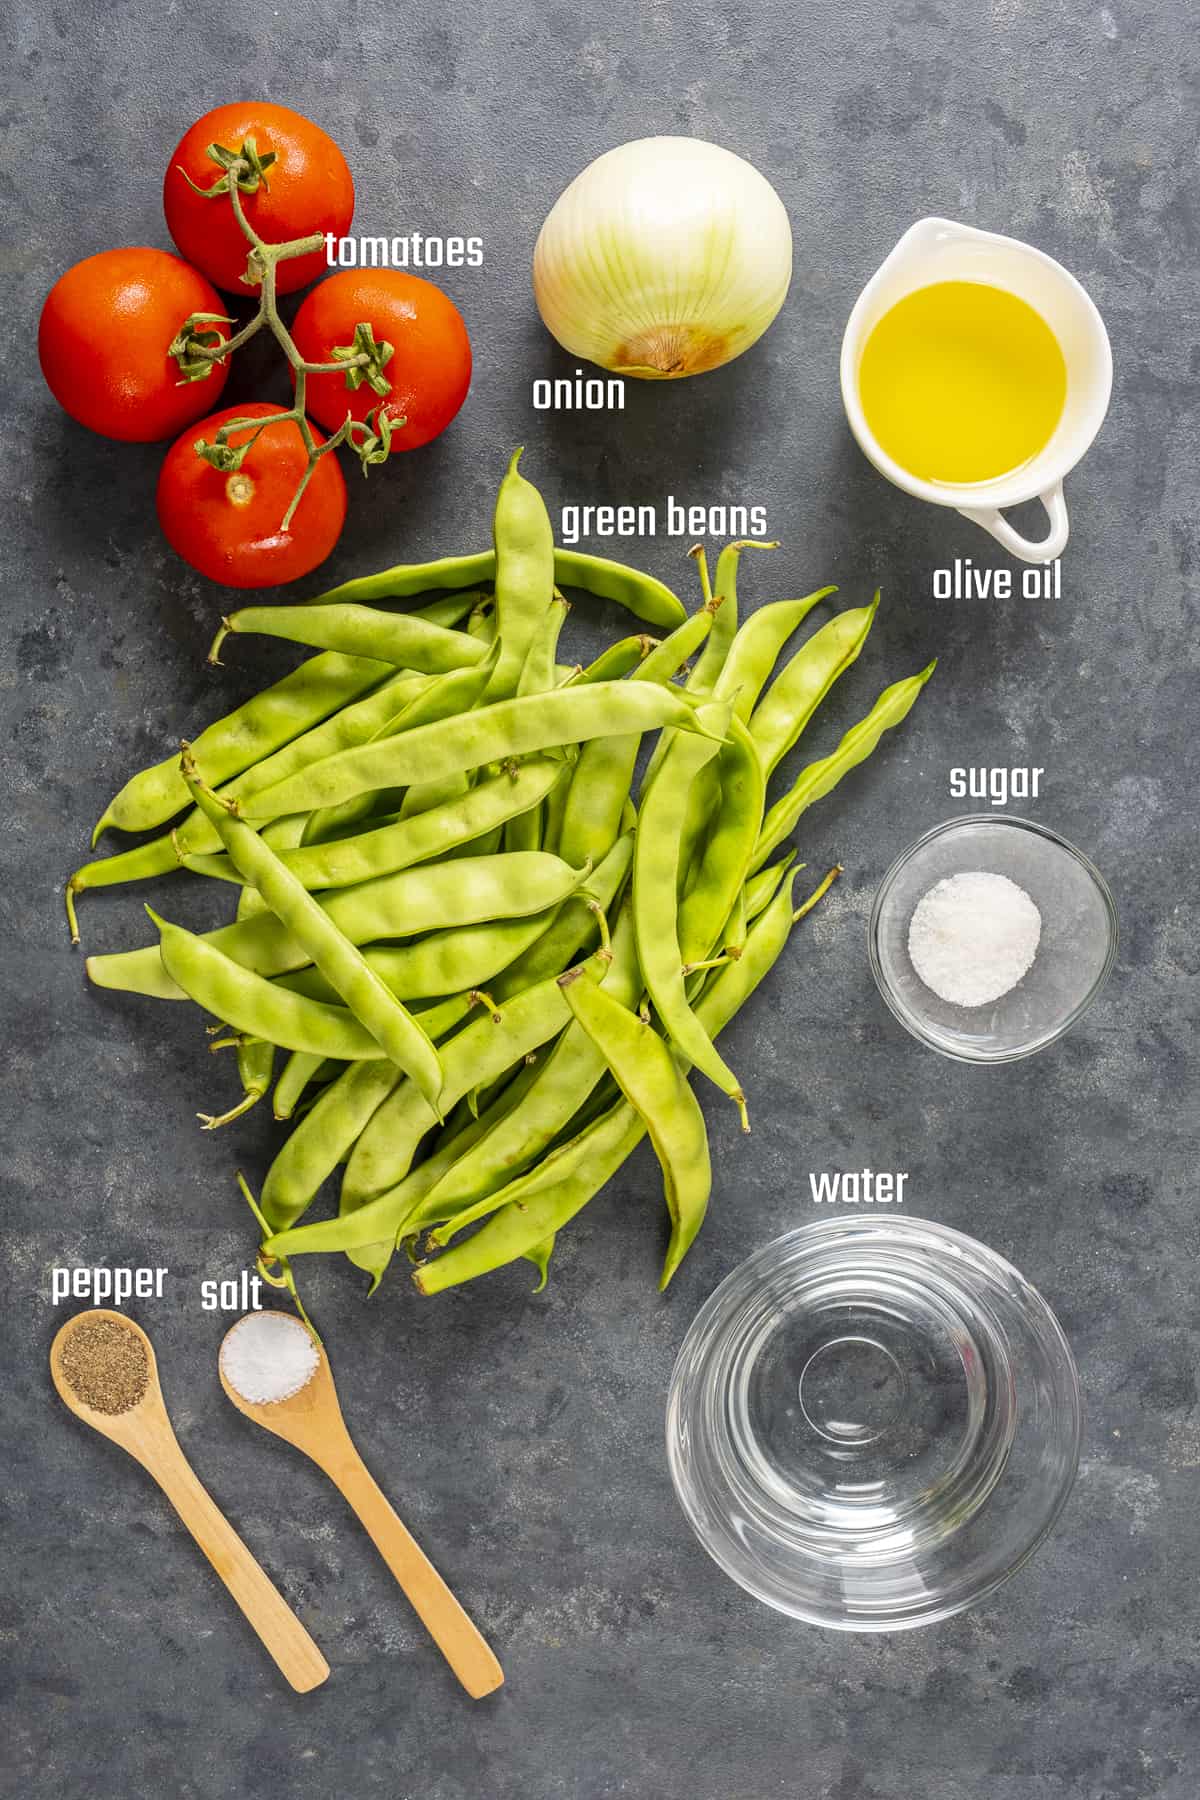 Green beans, tomatoes, onion, olive oil, sugar, salt and pepper and water on a dark background.